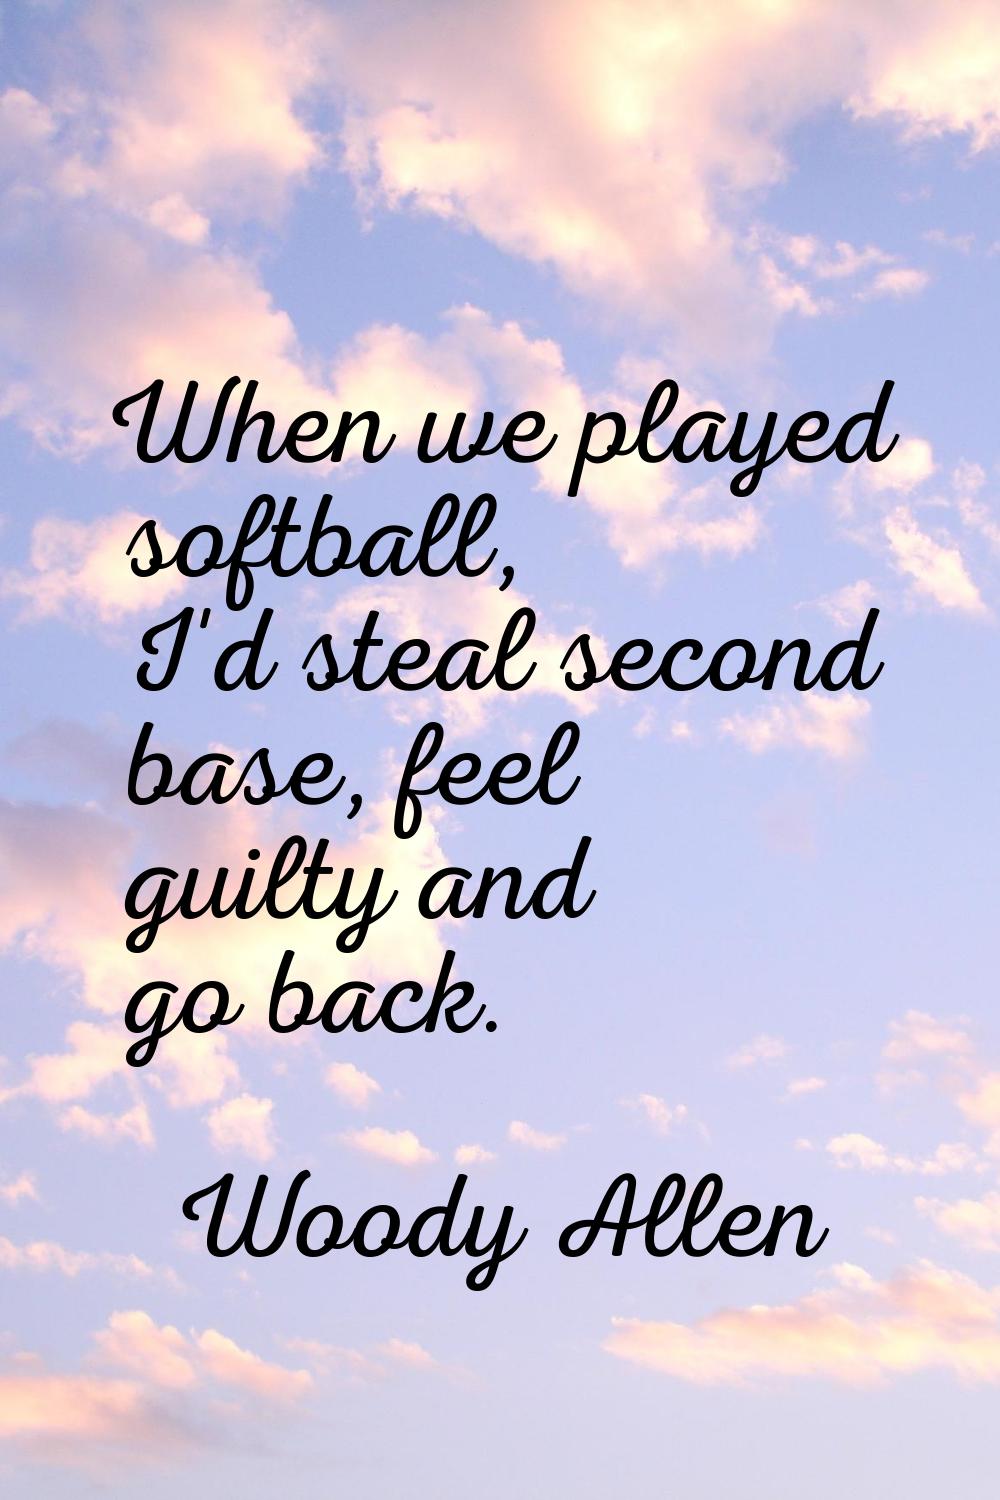 When we played softball, I'd steal second base, feel guilty and go back.